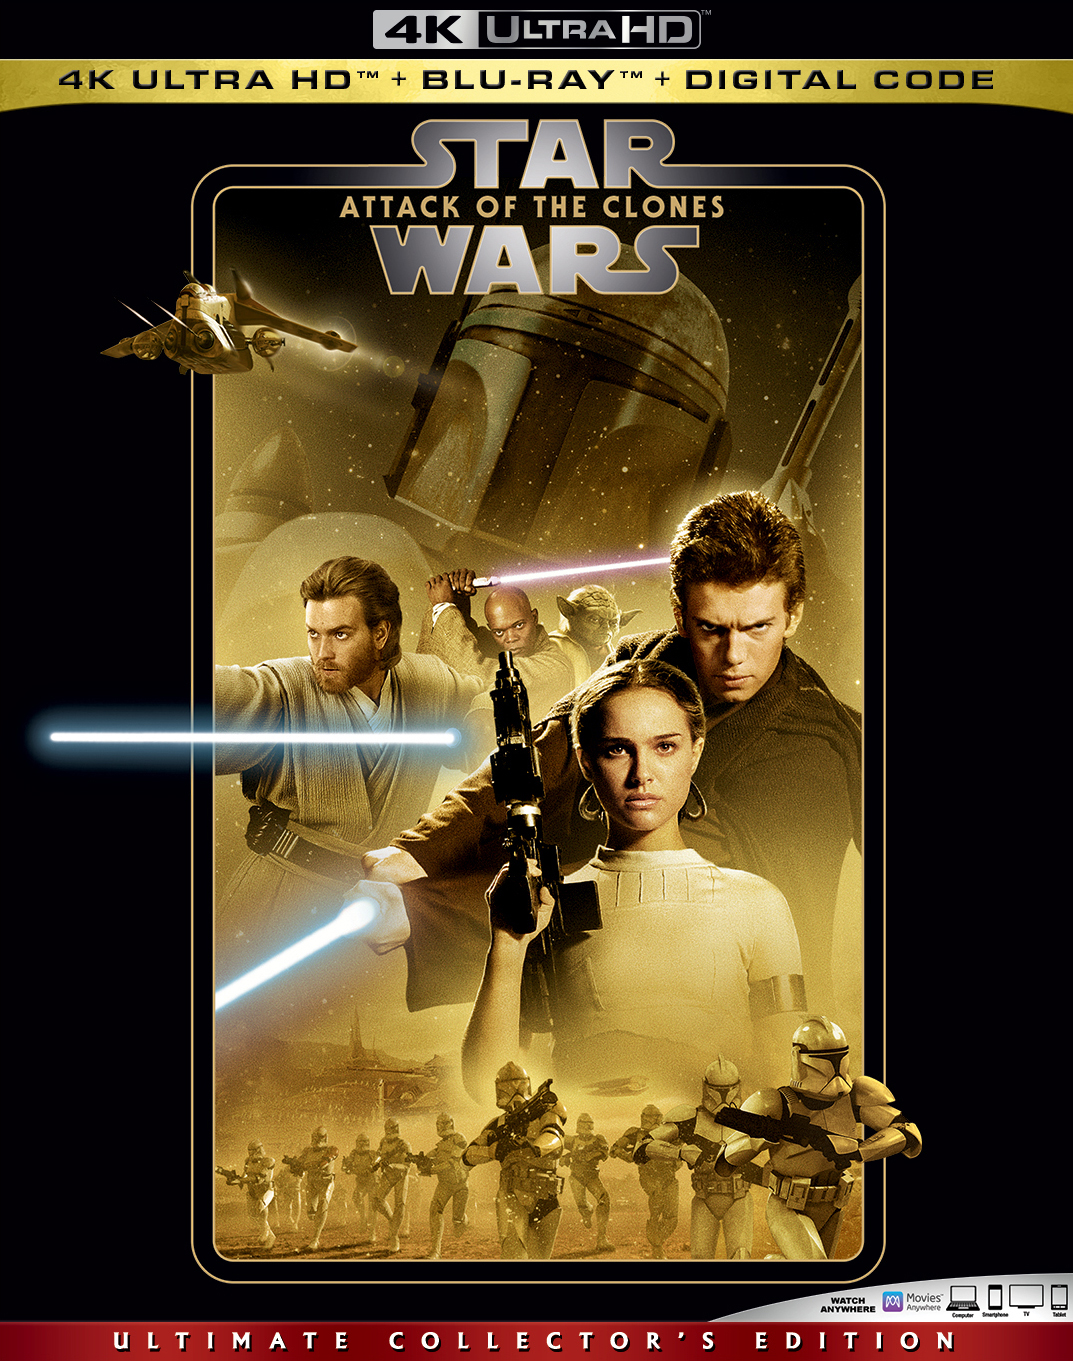 Star Wars: Attack of the Clones [Includes Digital Copy] [4K Ultra